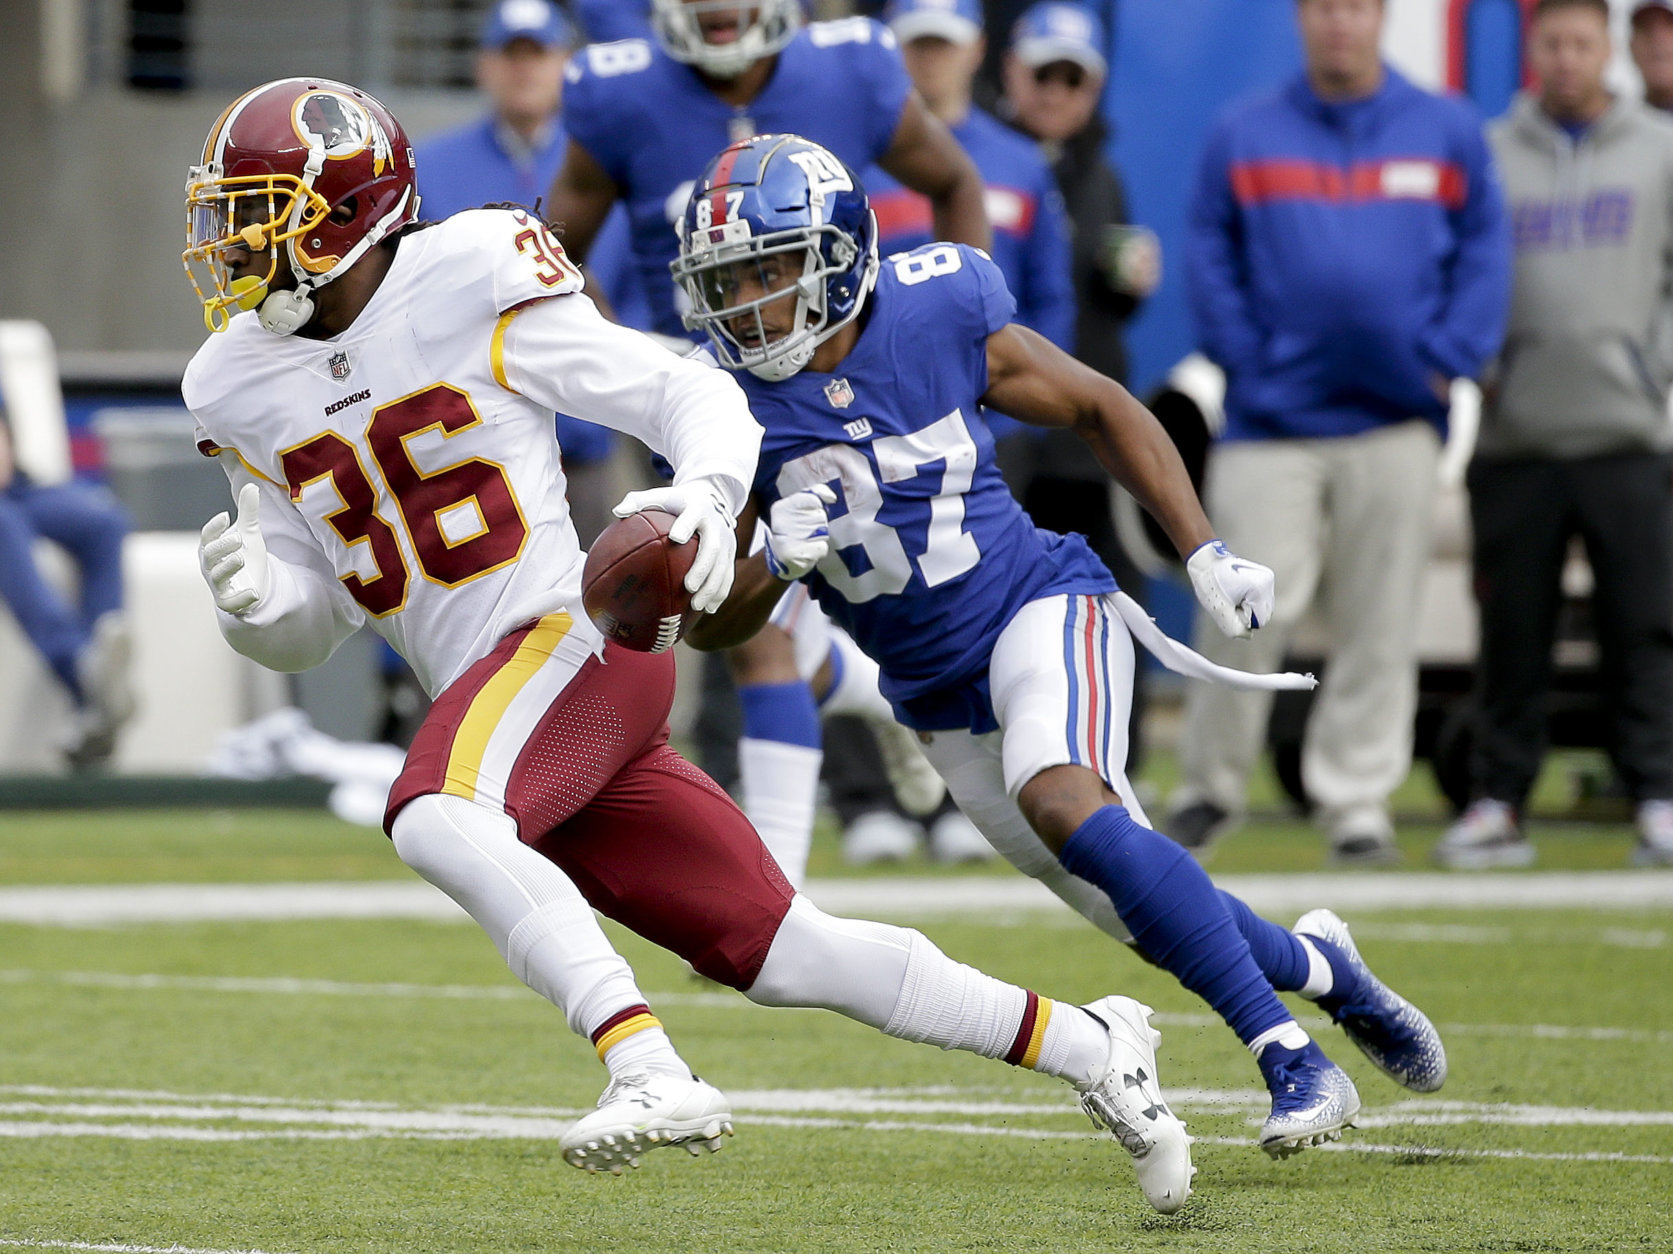 Washington Redskins free safety D.J. Swearinger (36) brings the ball back up the field after intercepting a pass by New York Giants quarterback Eli Manning during the third quarter of an NFL football game, Sunday, Oct. 28, 2018, in East Rutherford, N.J. (AP Photo/Seth Wenig)